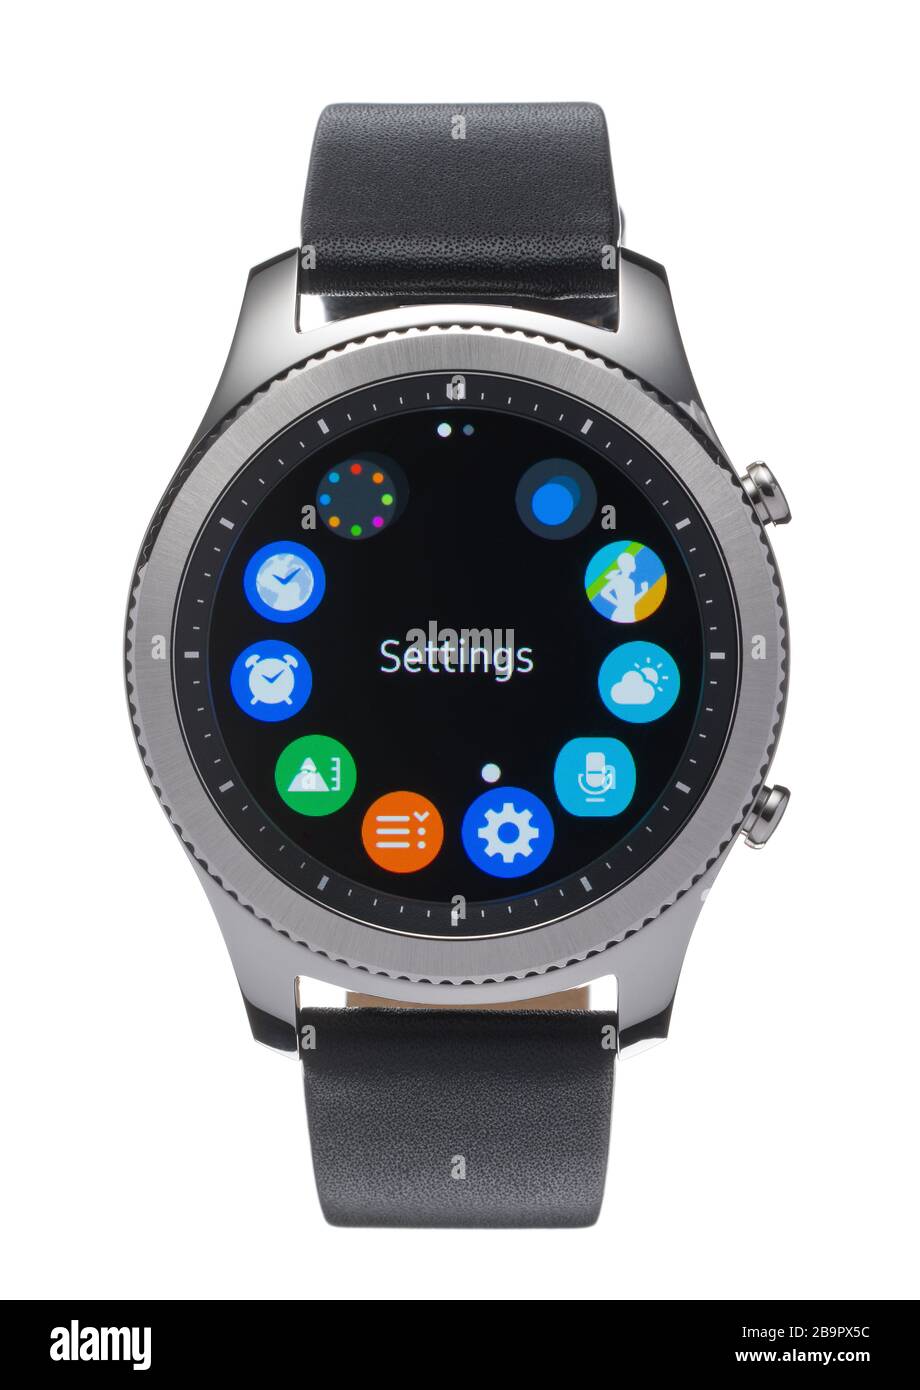 Samsung Gear classic watch with settings page on watch face. Stock Photo